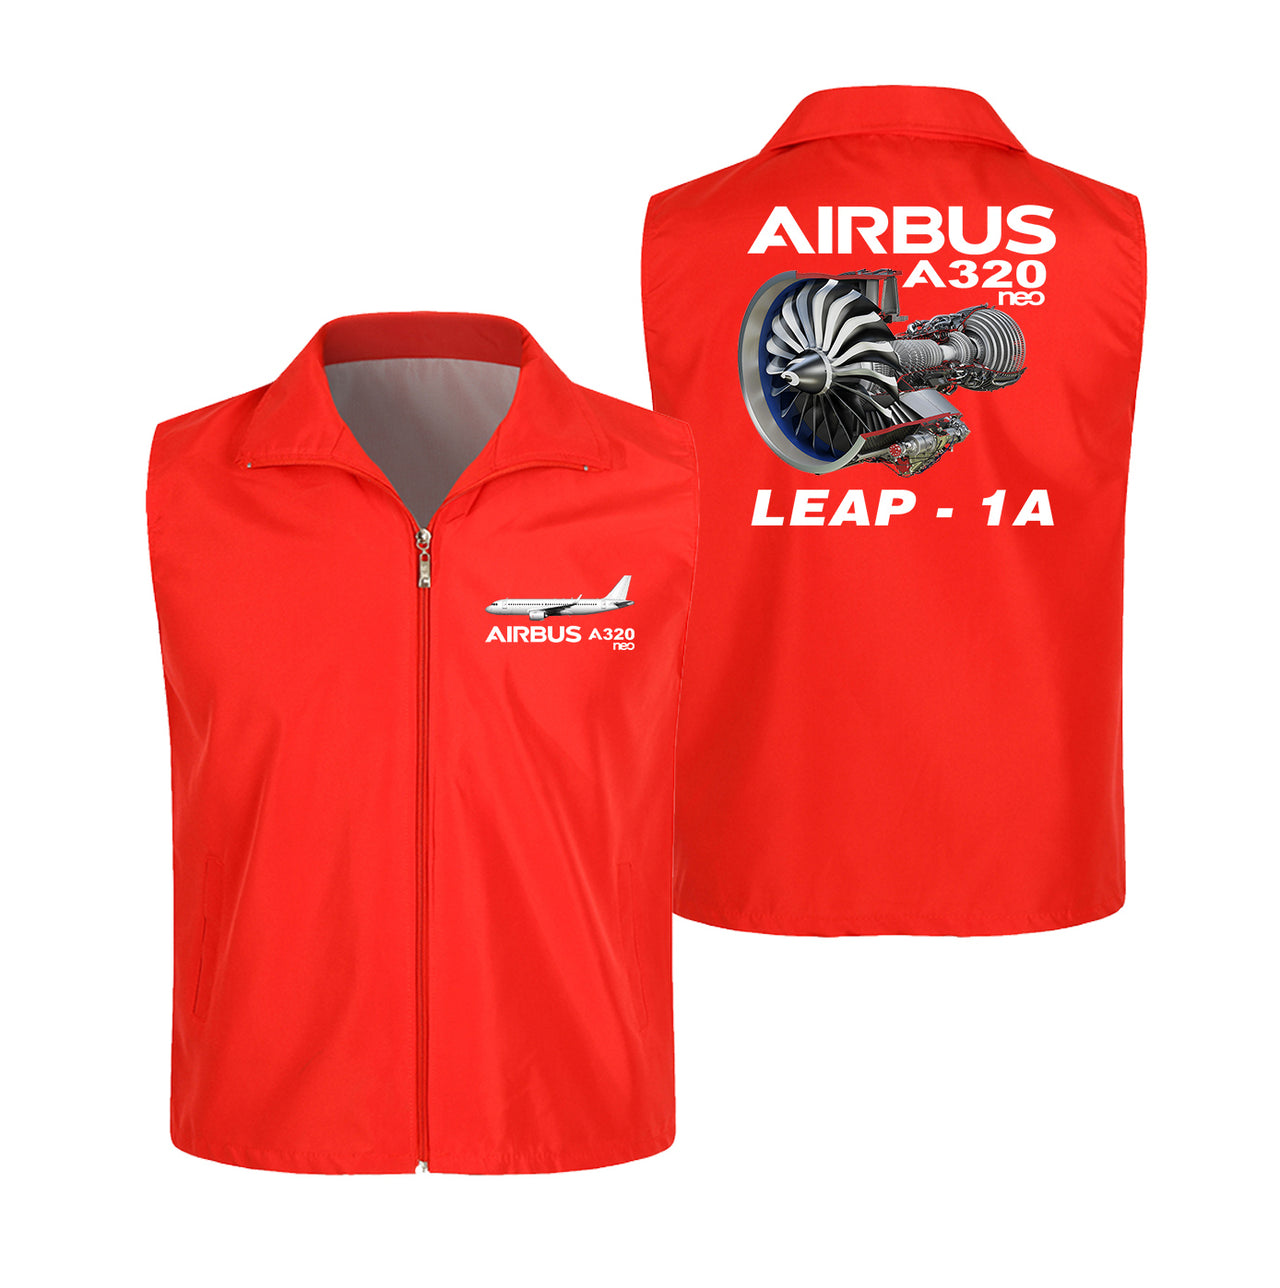 Airbus A320neo & Leap 1A Designed Thin Style Vests